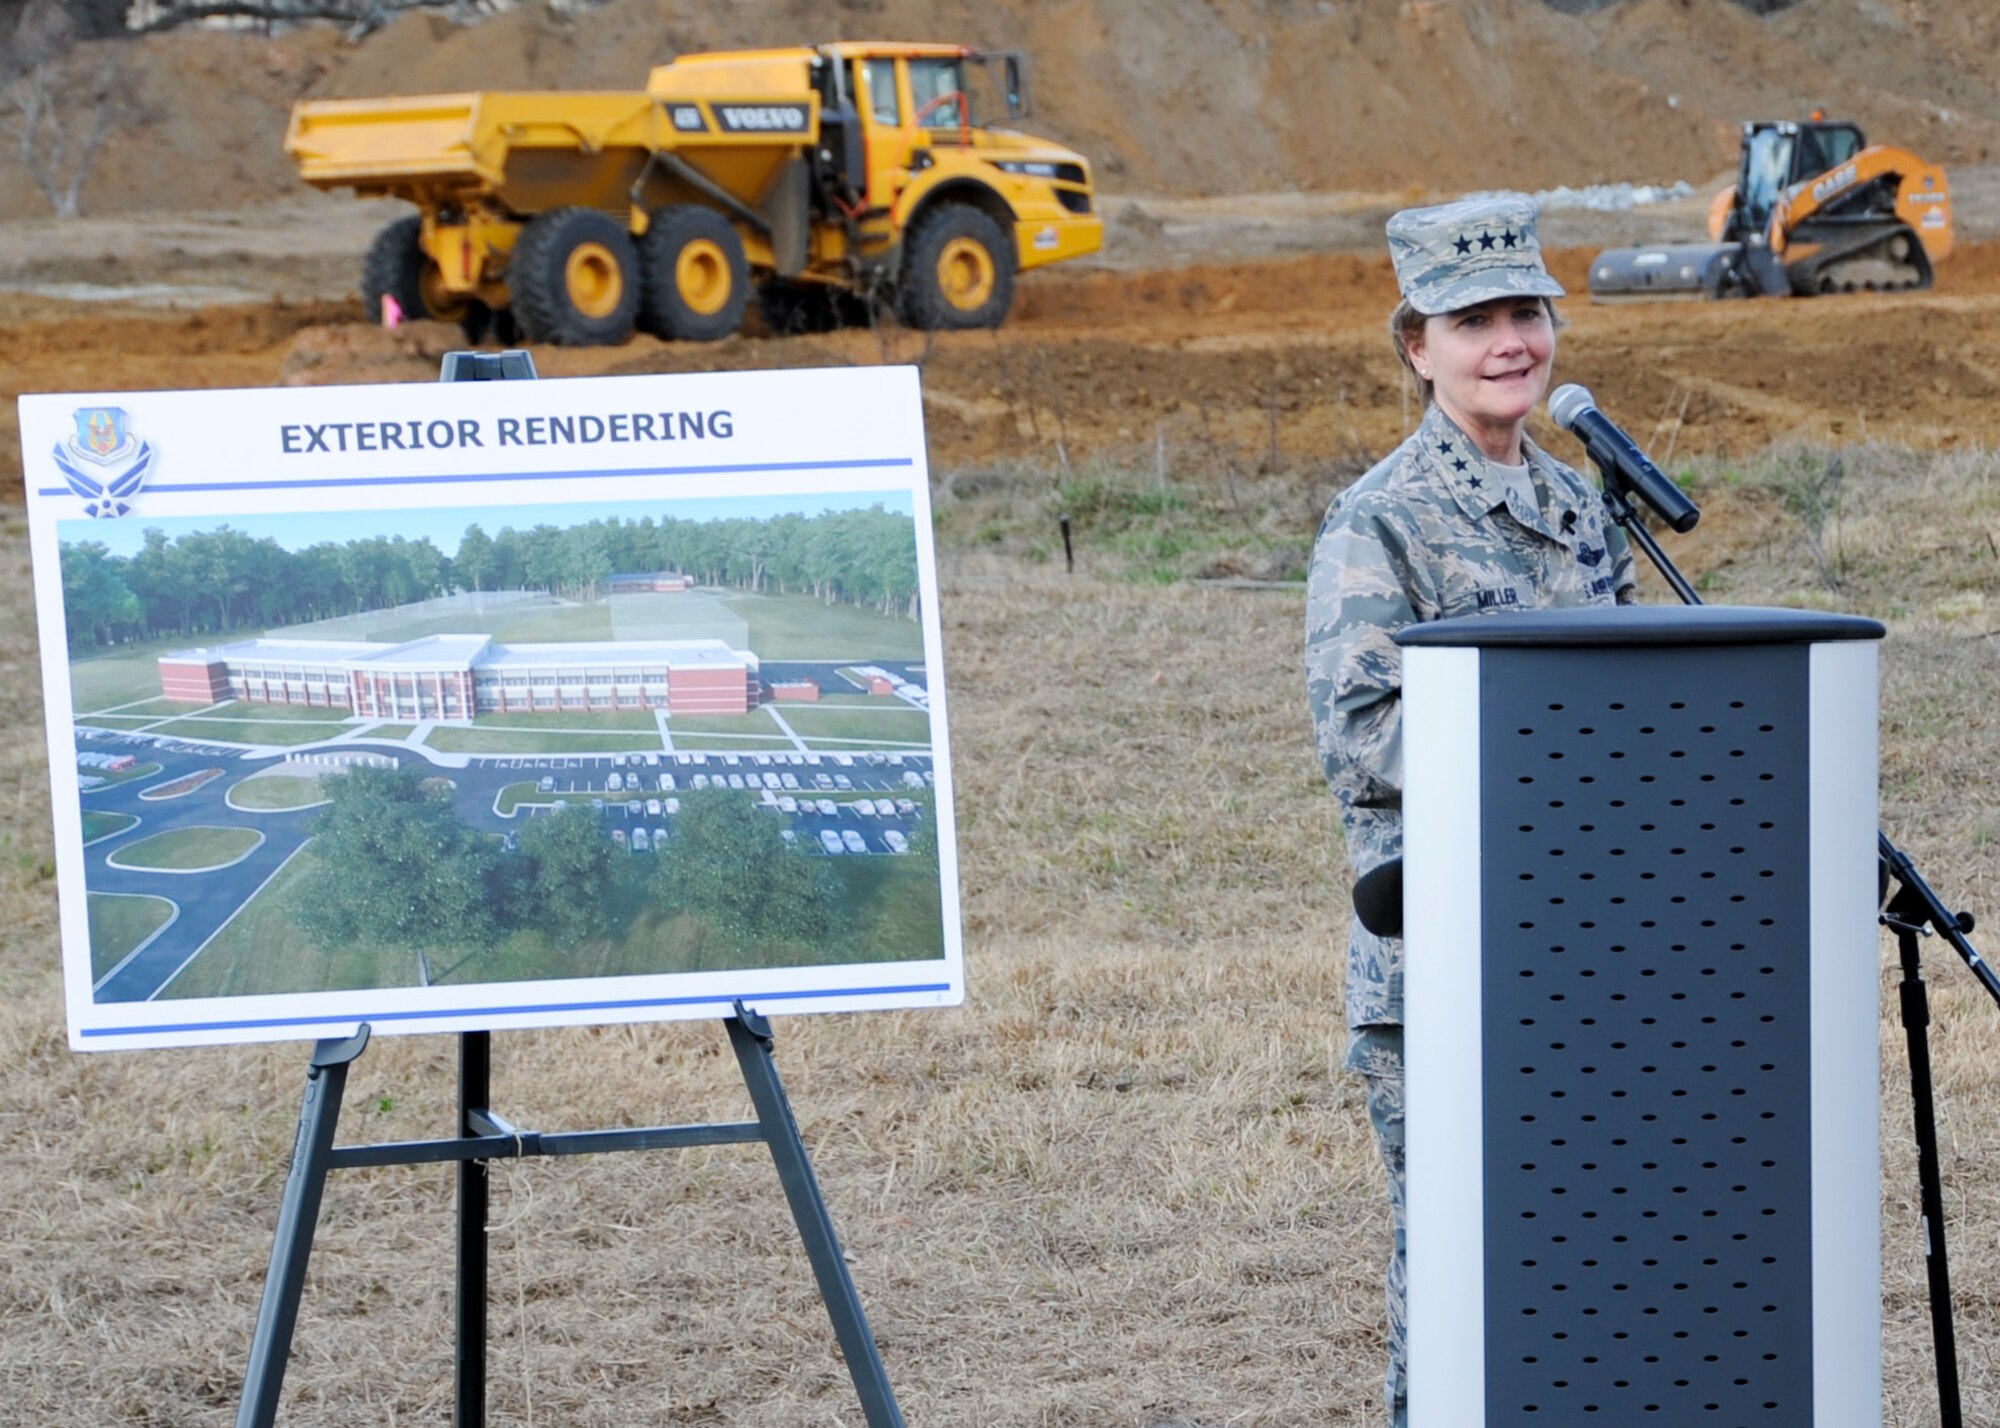 Lt. Gen. Maryanne Miller, commander of Air Force Reserve Command, makes opening remarks during a groundbreaking ceremony at Robins Air Force Base, Ga., Feb. 2, 2017. The ceremony initiated the construction of the first phase of the new AFRC headquarters complex, which will consolidate approximately 965 employees into one facility when all three phases of construction are complete. (U.S. Air Force photo by Staff Sgt. Ciara Gosier)